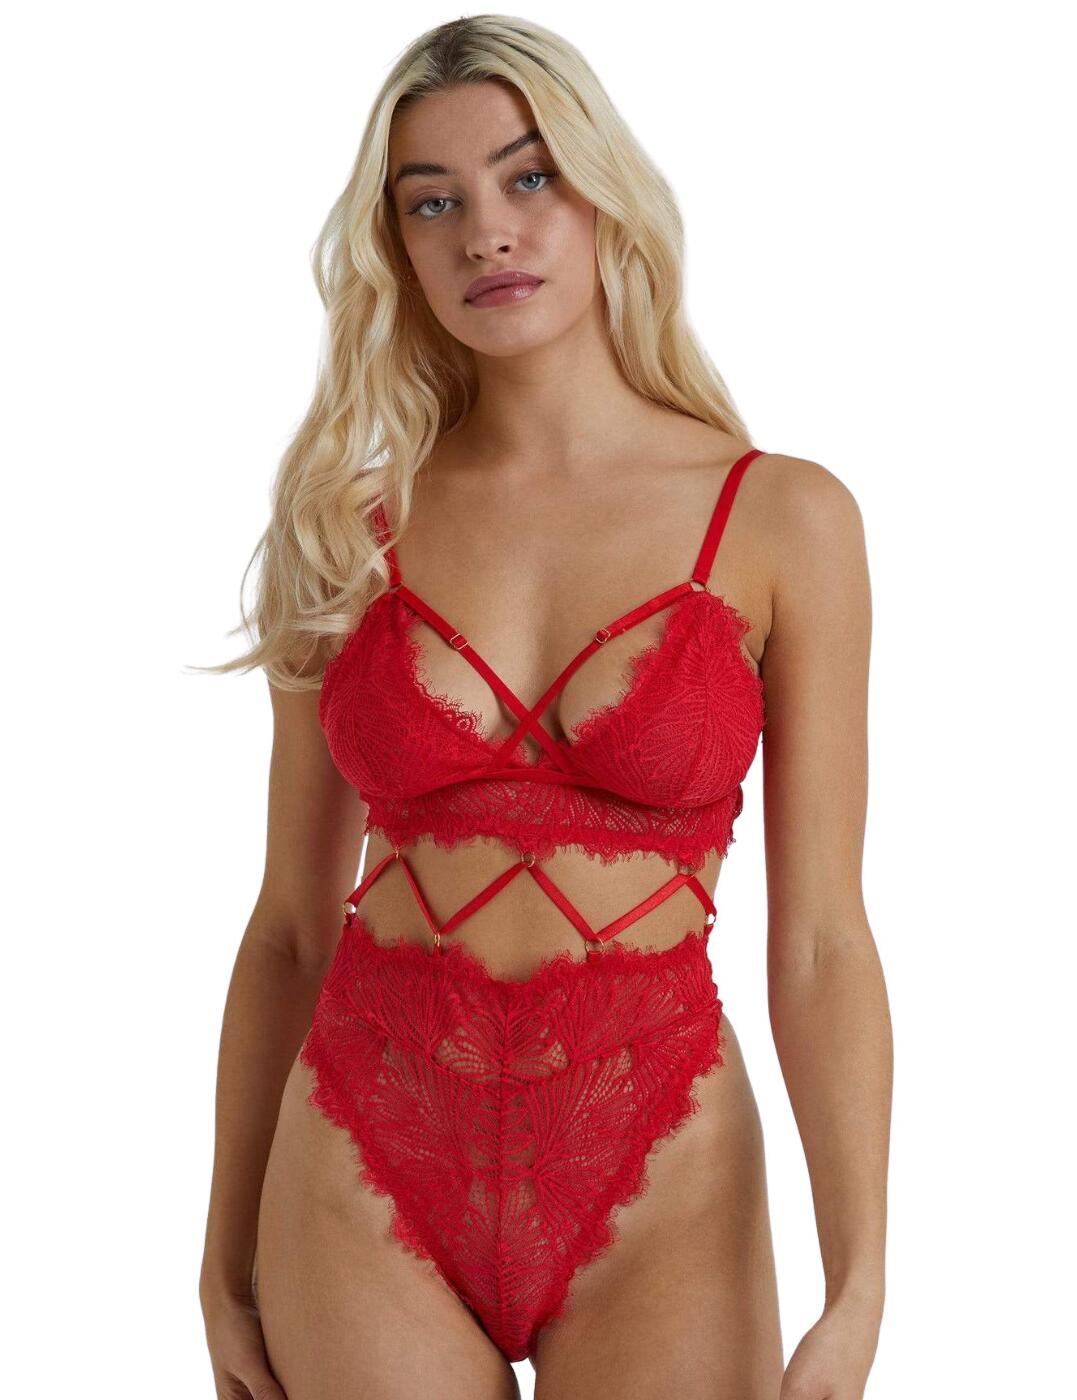 Wolf & Whistle Angelica Lace Body Red